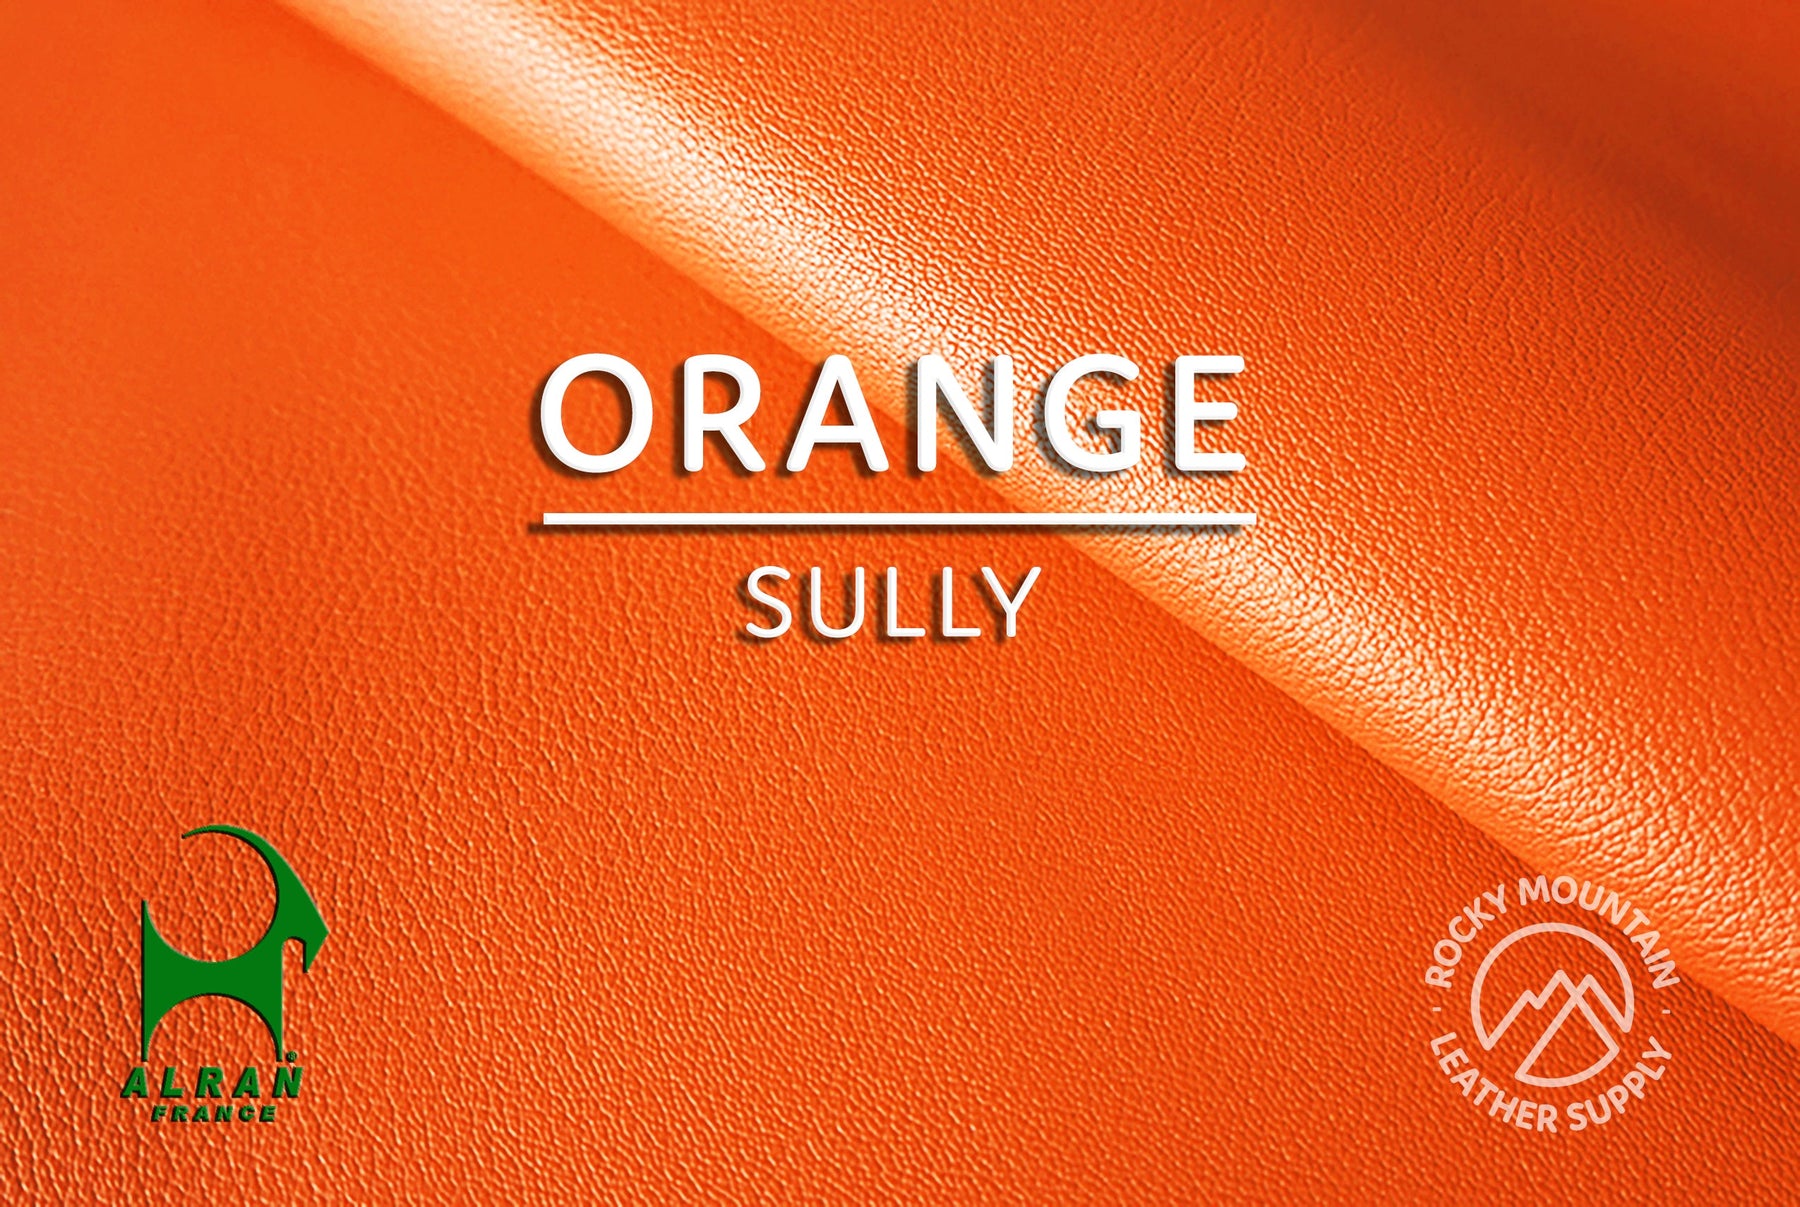 Overstock - Alran 🇫🇷 - "Sully" Chevre Chagrin - Goat Leather (~3sqft)